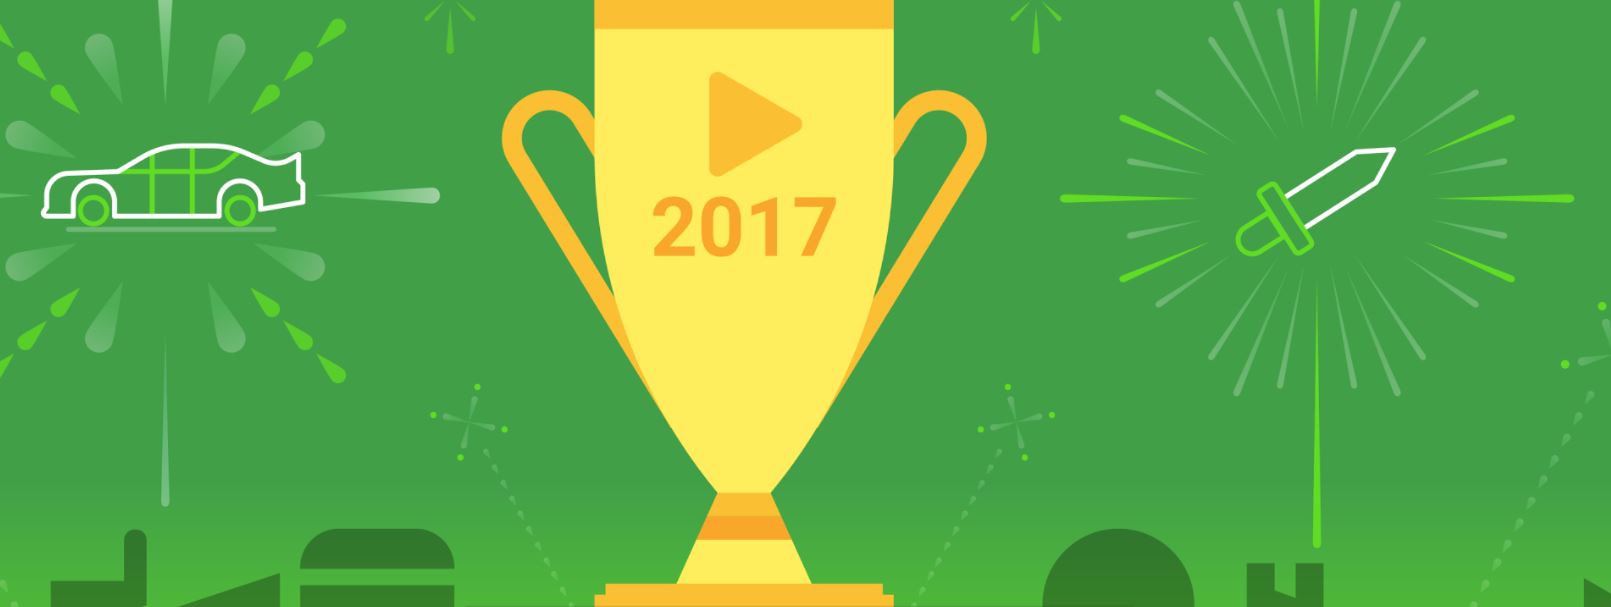 Google Play Announces "Best of 2017" - Great Android Christmas Shopping List